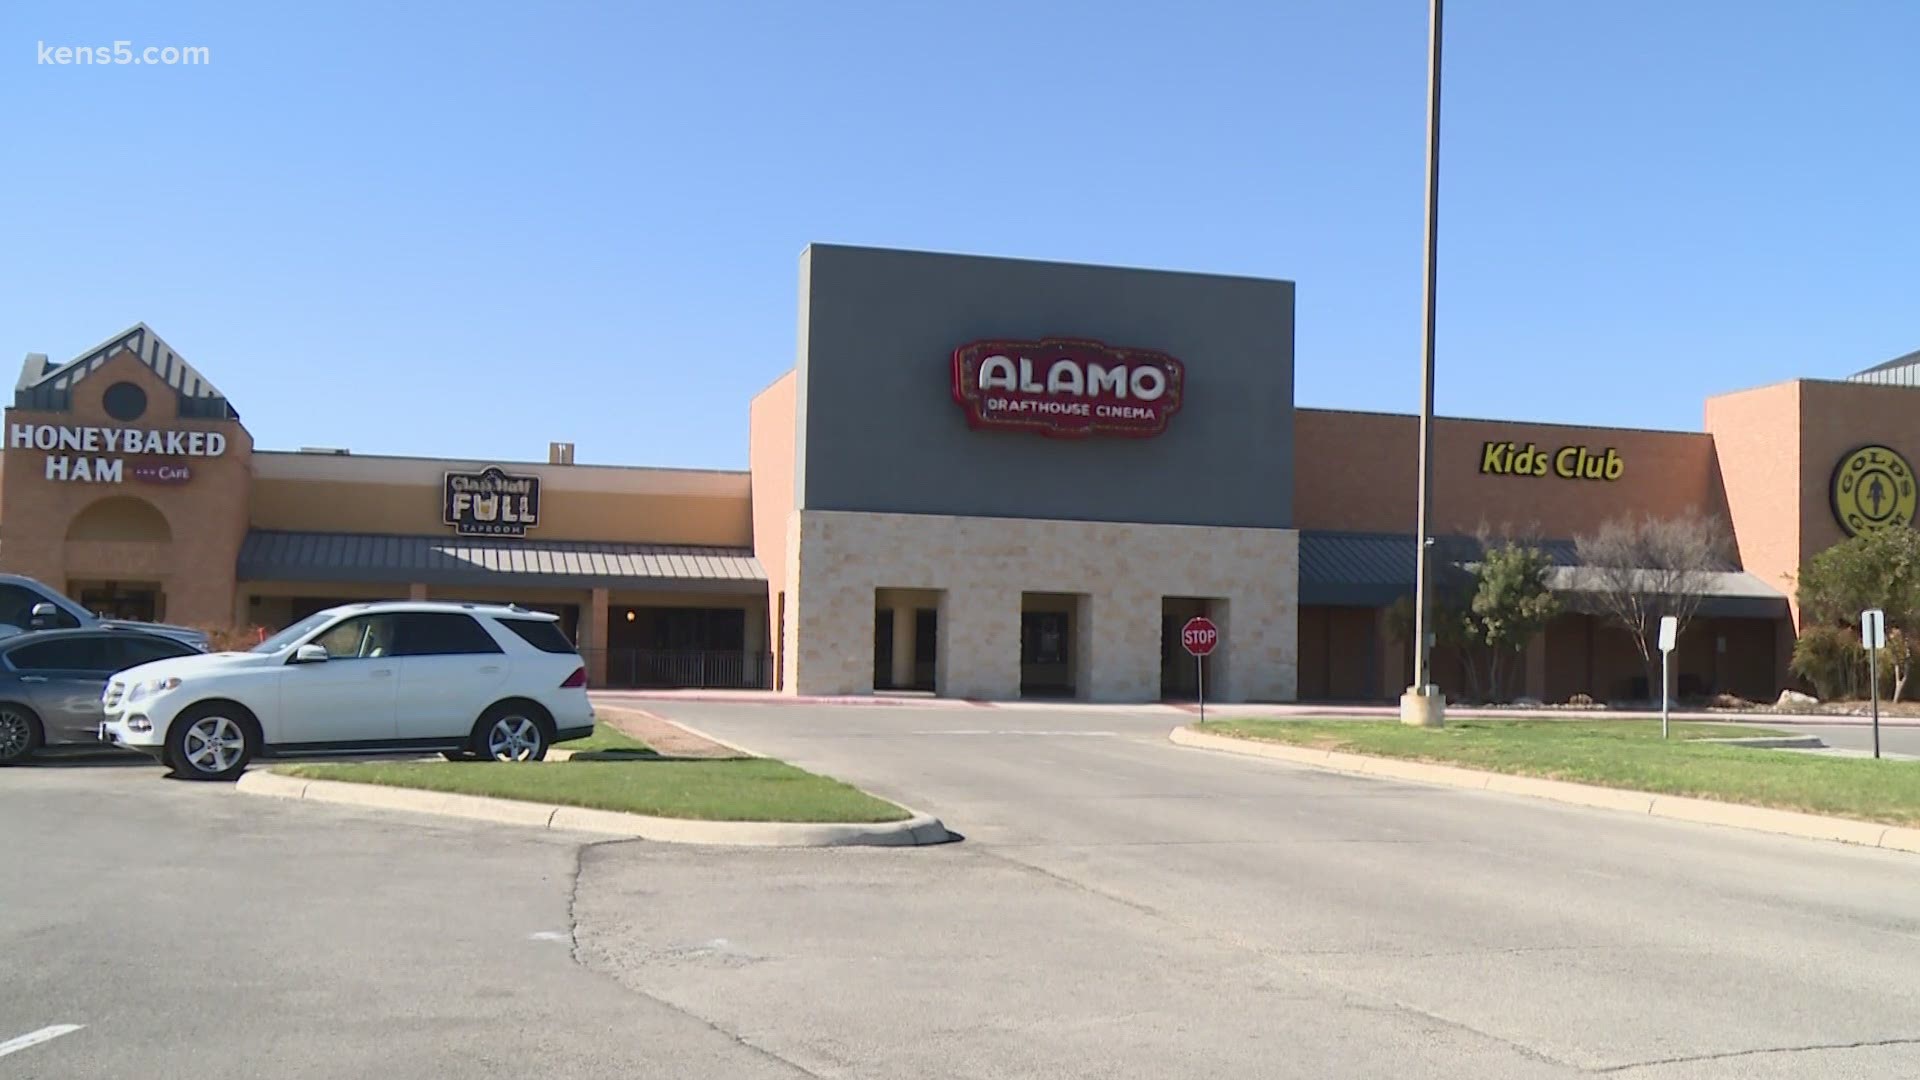 Alamo Drafthouse announced they company filed Chapter 11 Bankruptcy, but New Braunfels location still shutting their doors.